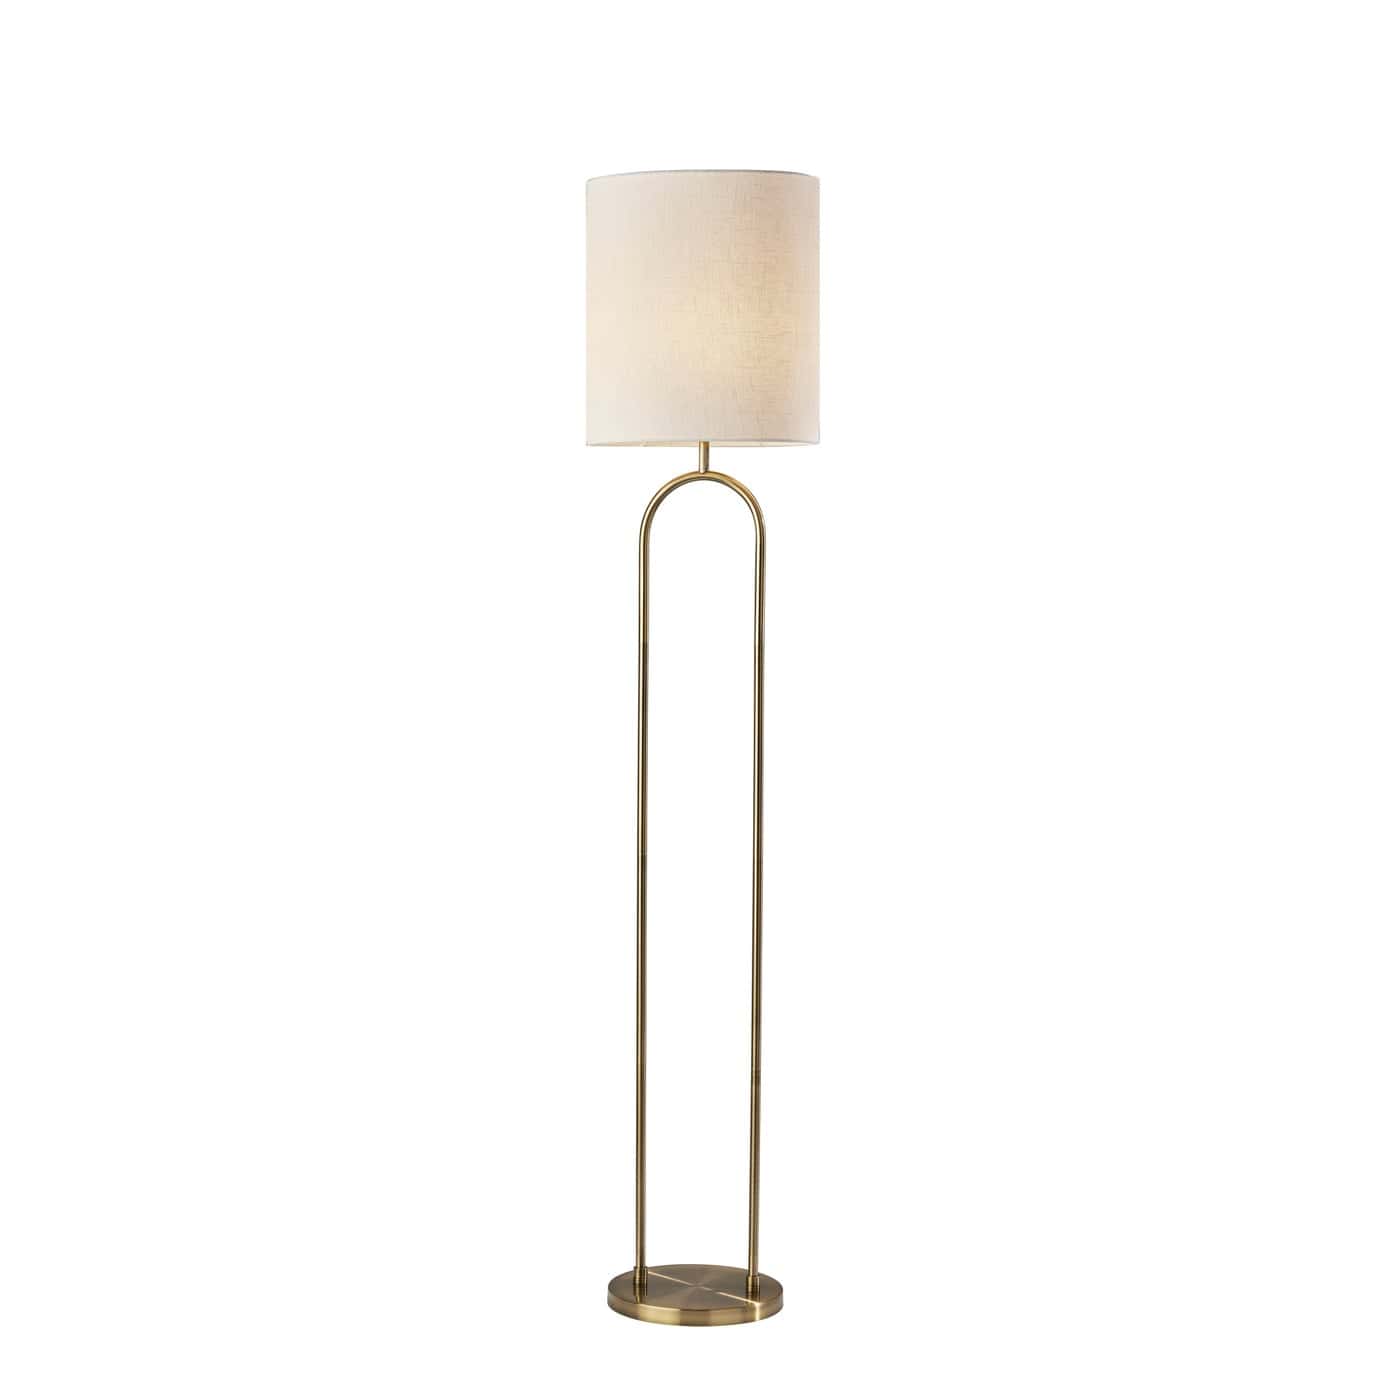 Joey Floor Lamp Antique Brass by Adesso Furniture